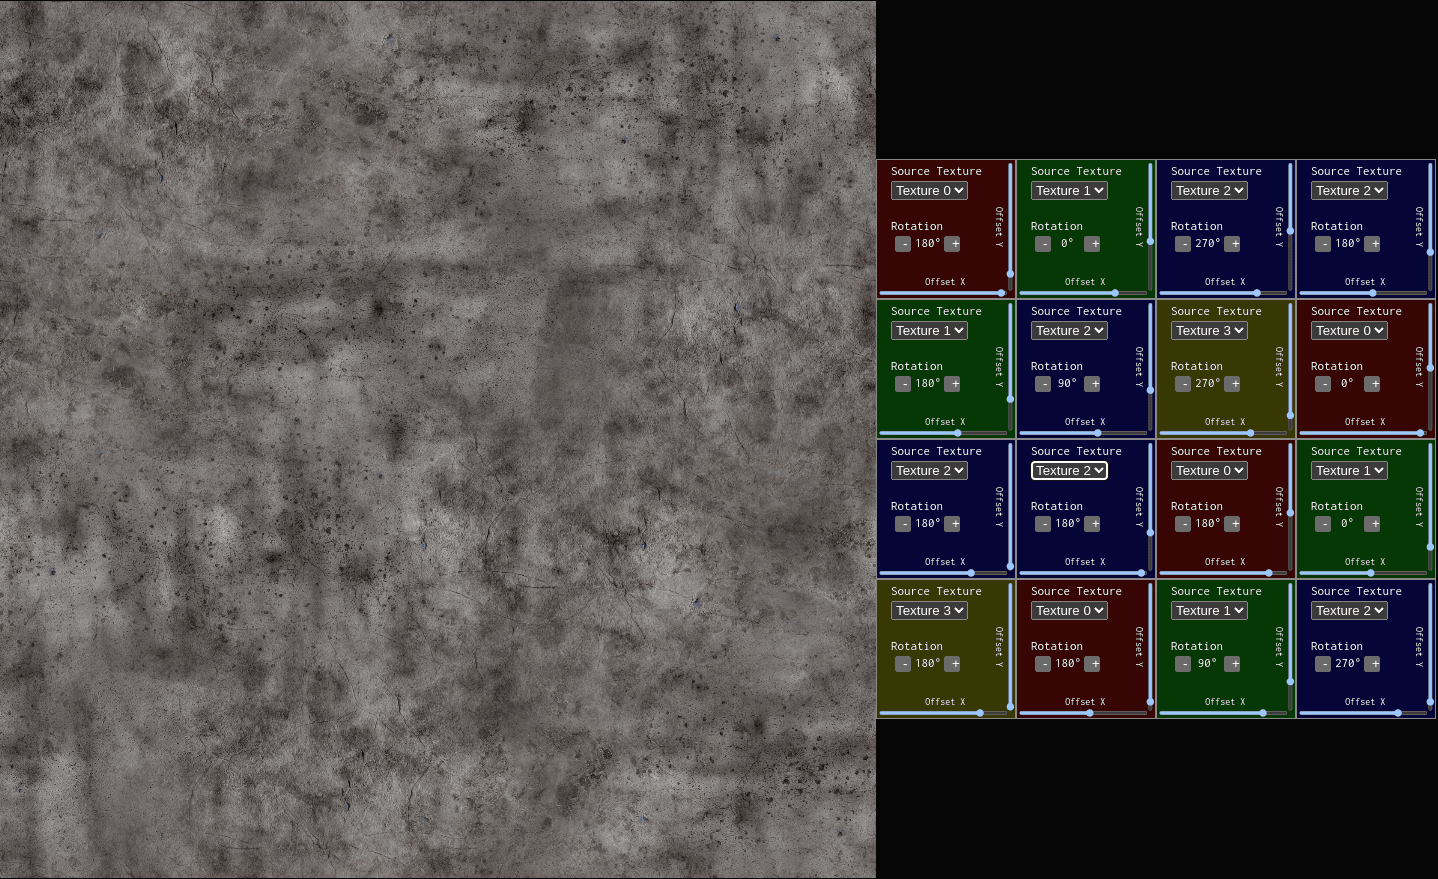 A screenshot of the seamless texture stitcher tool showing the UI on the right and a preview of the stitched texture on the left.  The stitched texture is a concrete pattern and it consists of 4 different concrete textures blended together while maintaining the seamless tiling.  The UI consists of a matrix of squares for controlling each of the sub-textures including selecting the source texture to use, rotating, and offsetting.